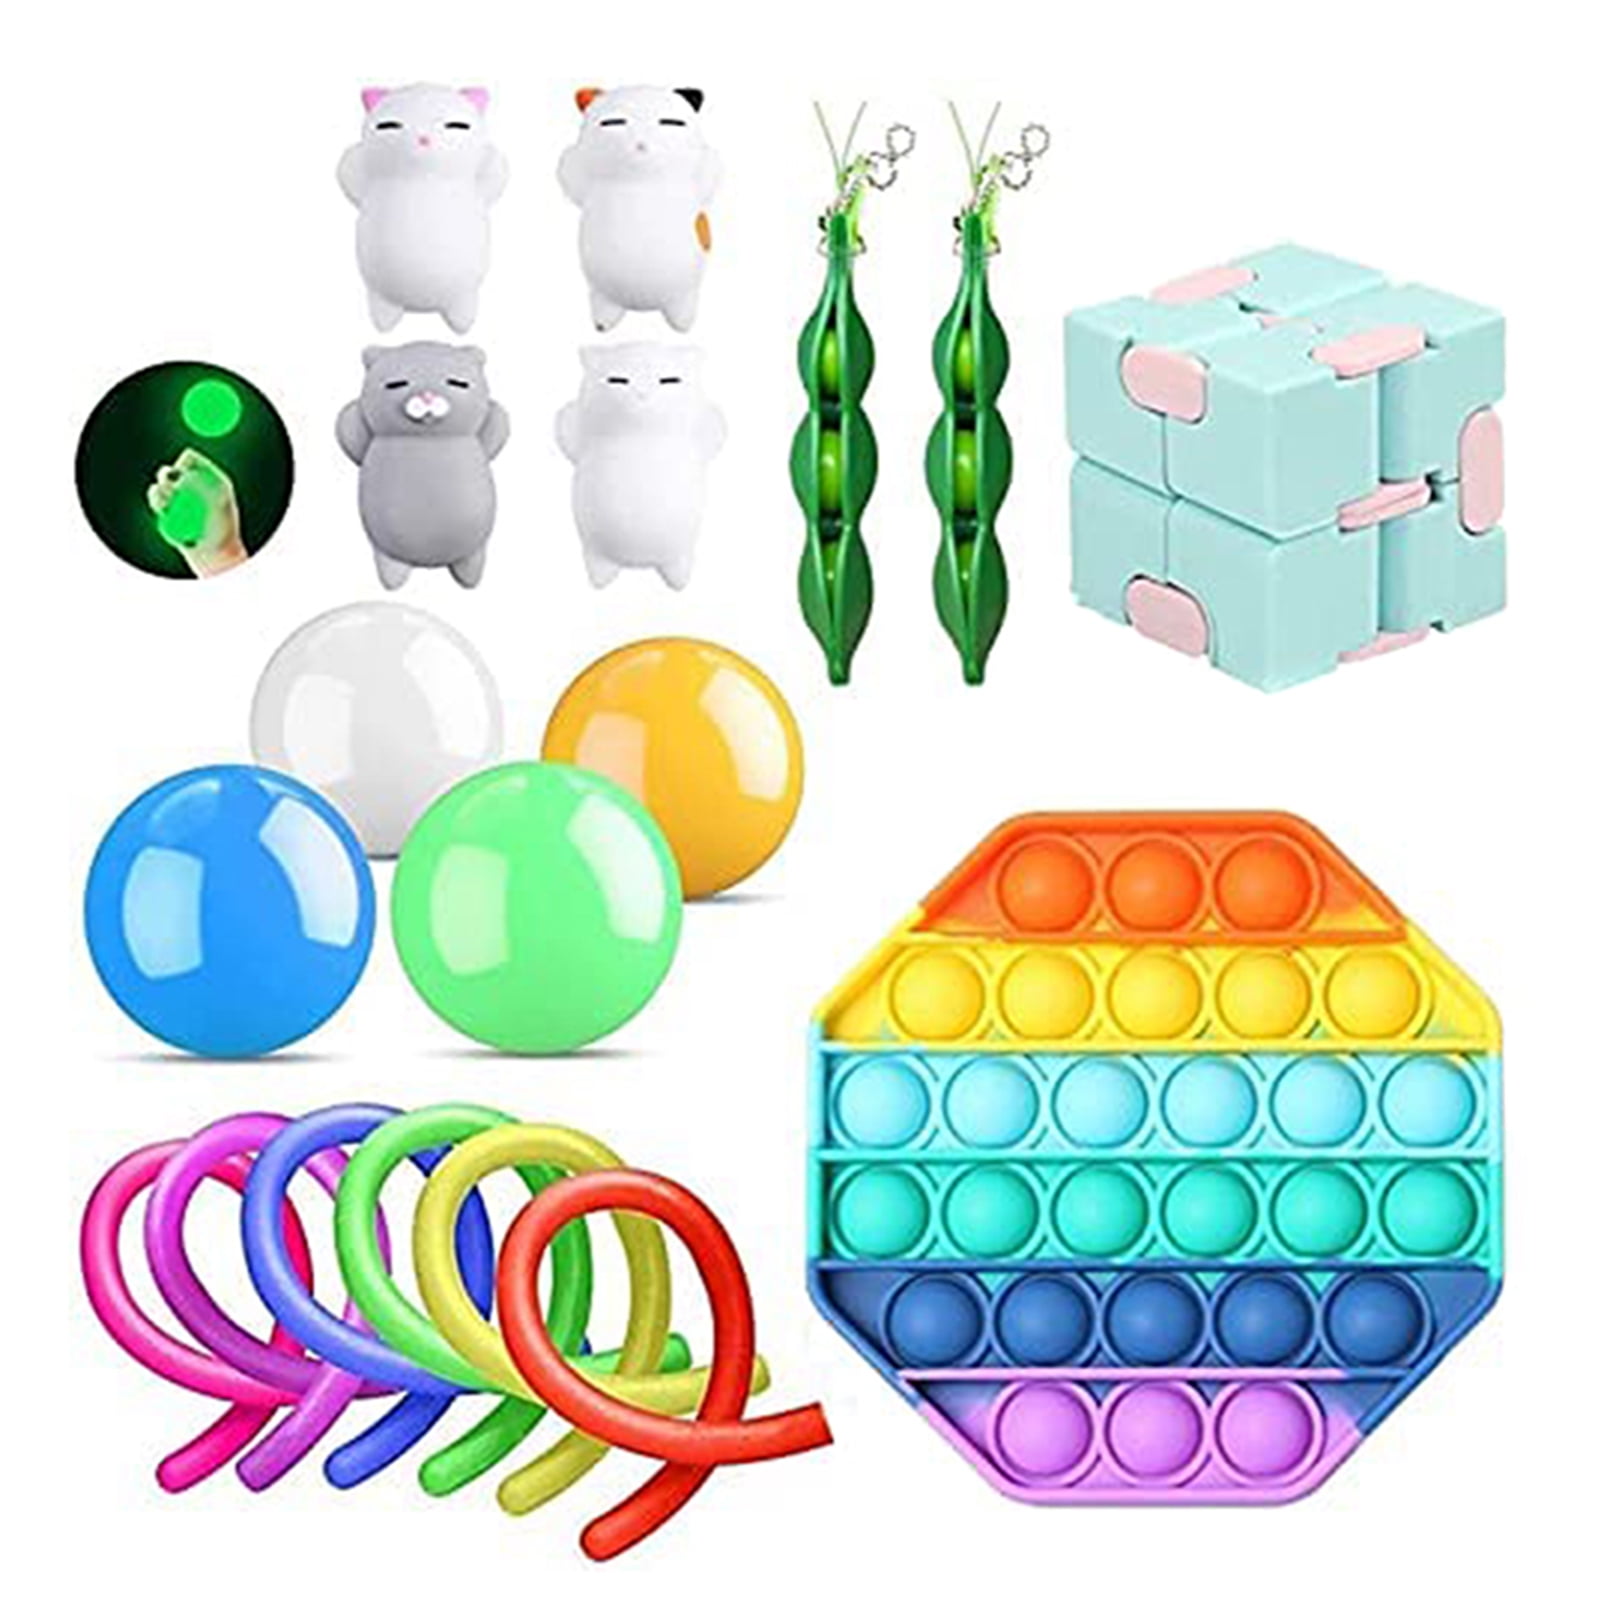 Details about   Adults Kids Toys Mesh & Marble Fidget Toy Stress/Anxiety Relief Soothing Sensory 